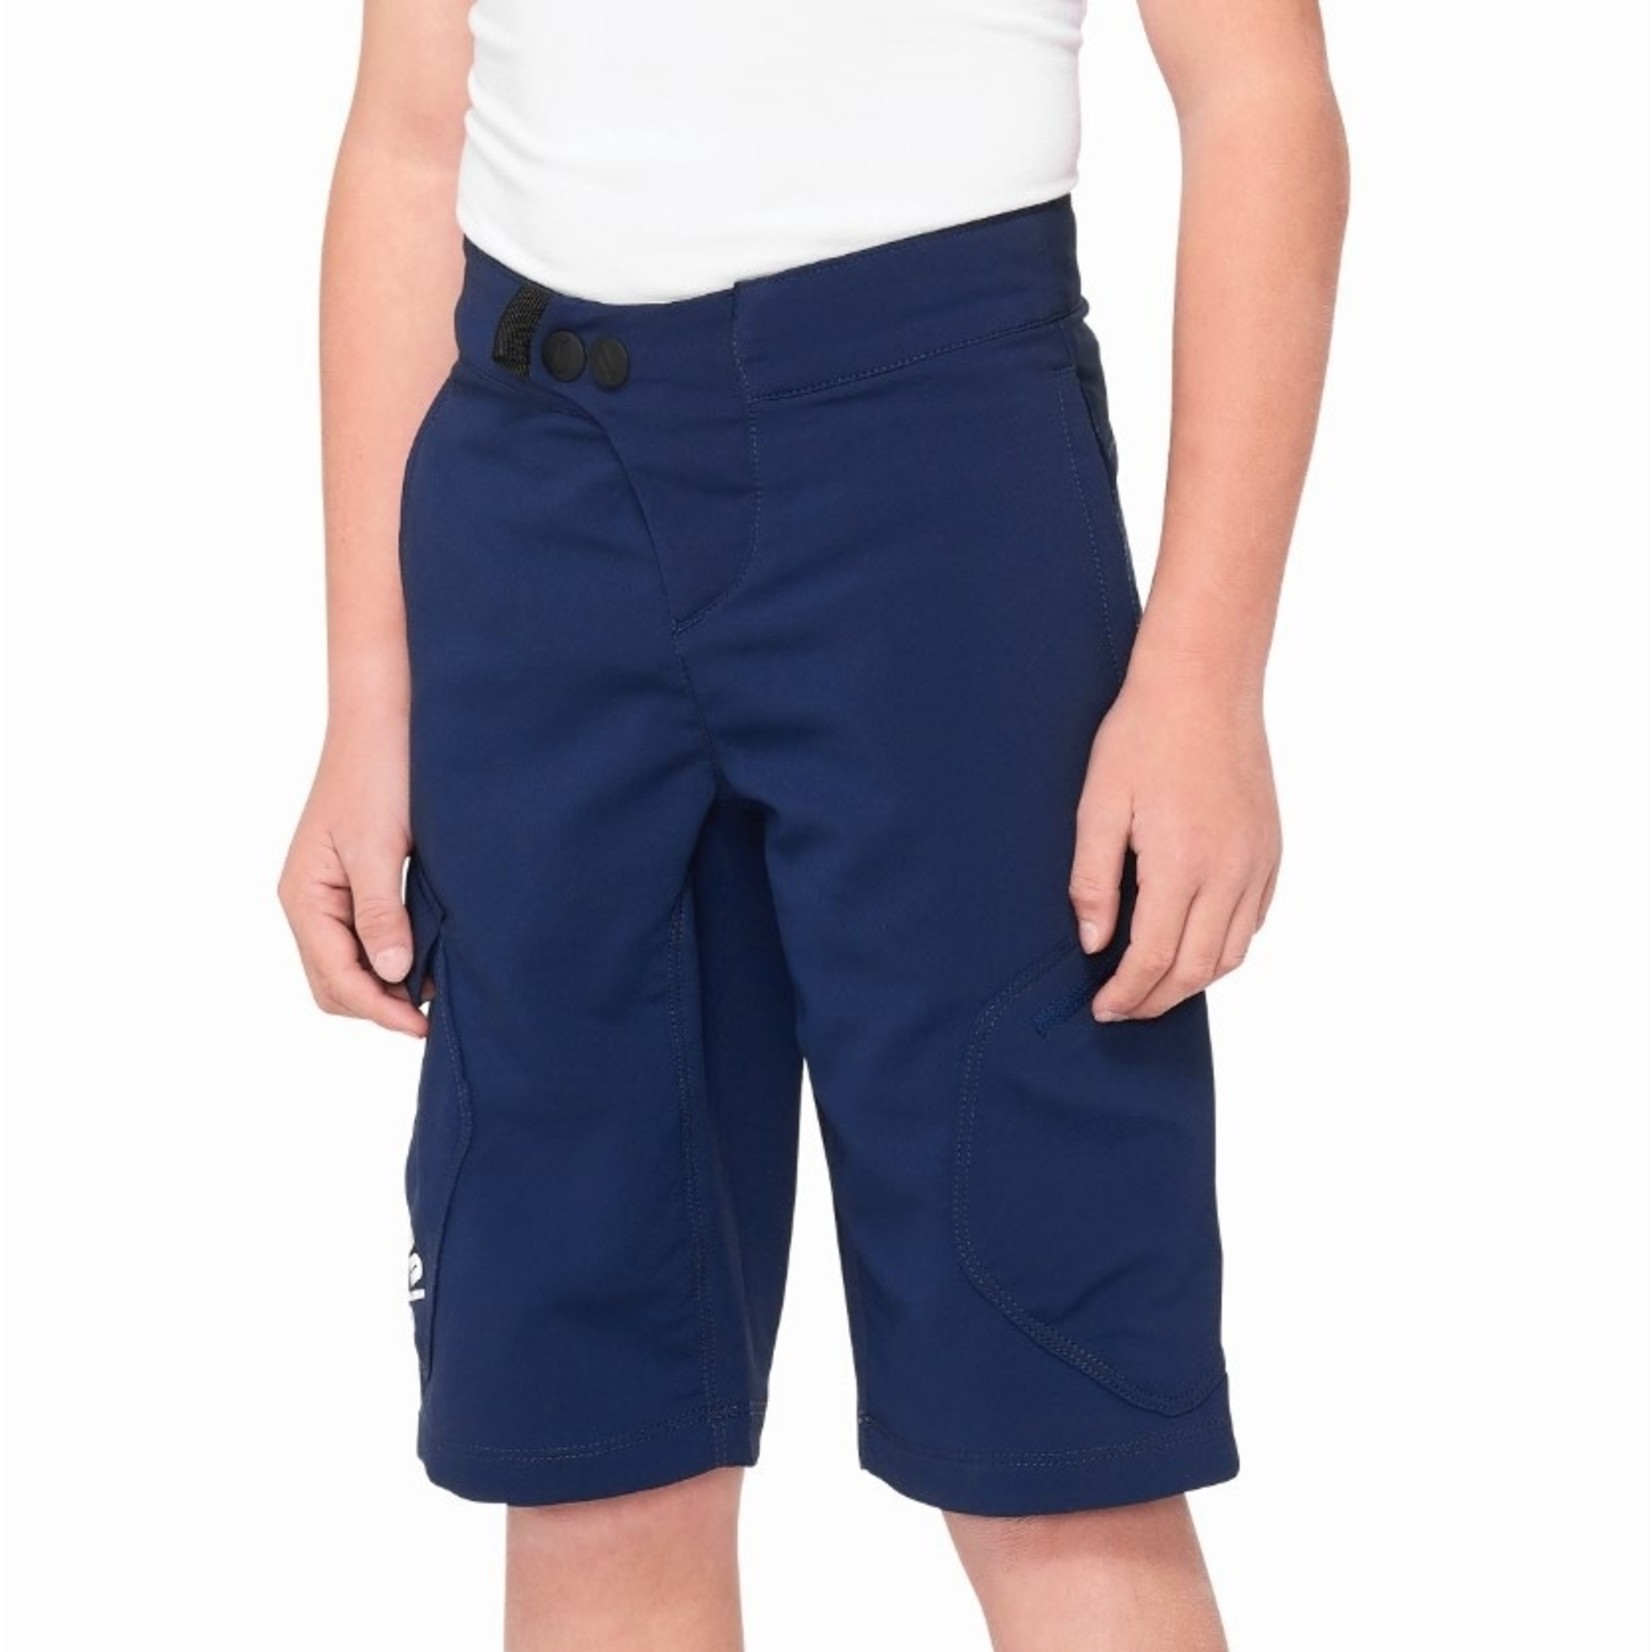 100 Percent 100% Ridecamp Youth Bike Shorts - Navy 100% Polyester Available Size 22 To 28